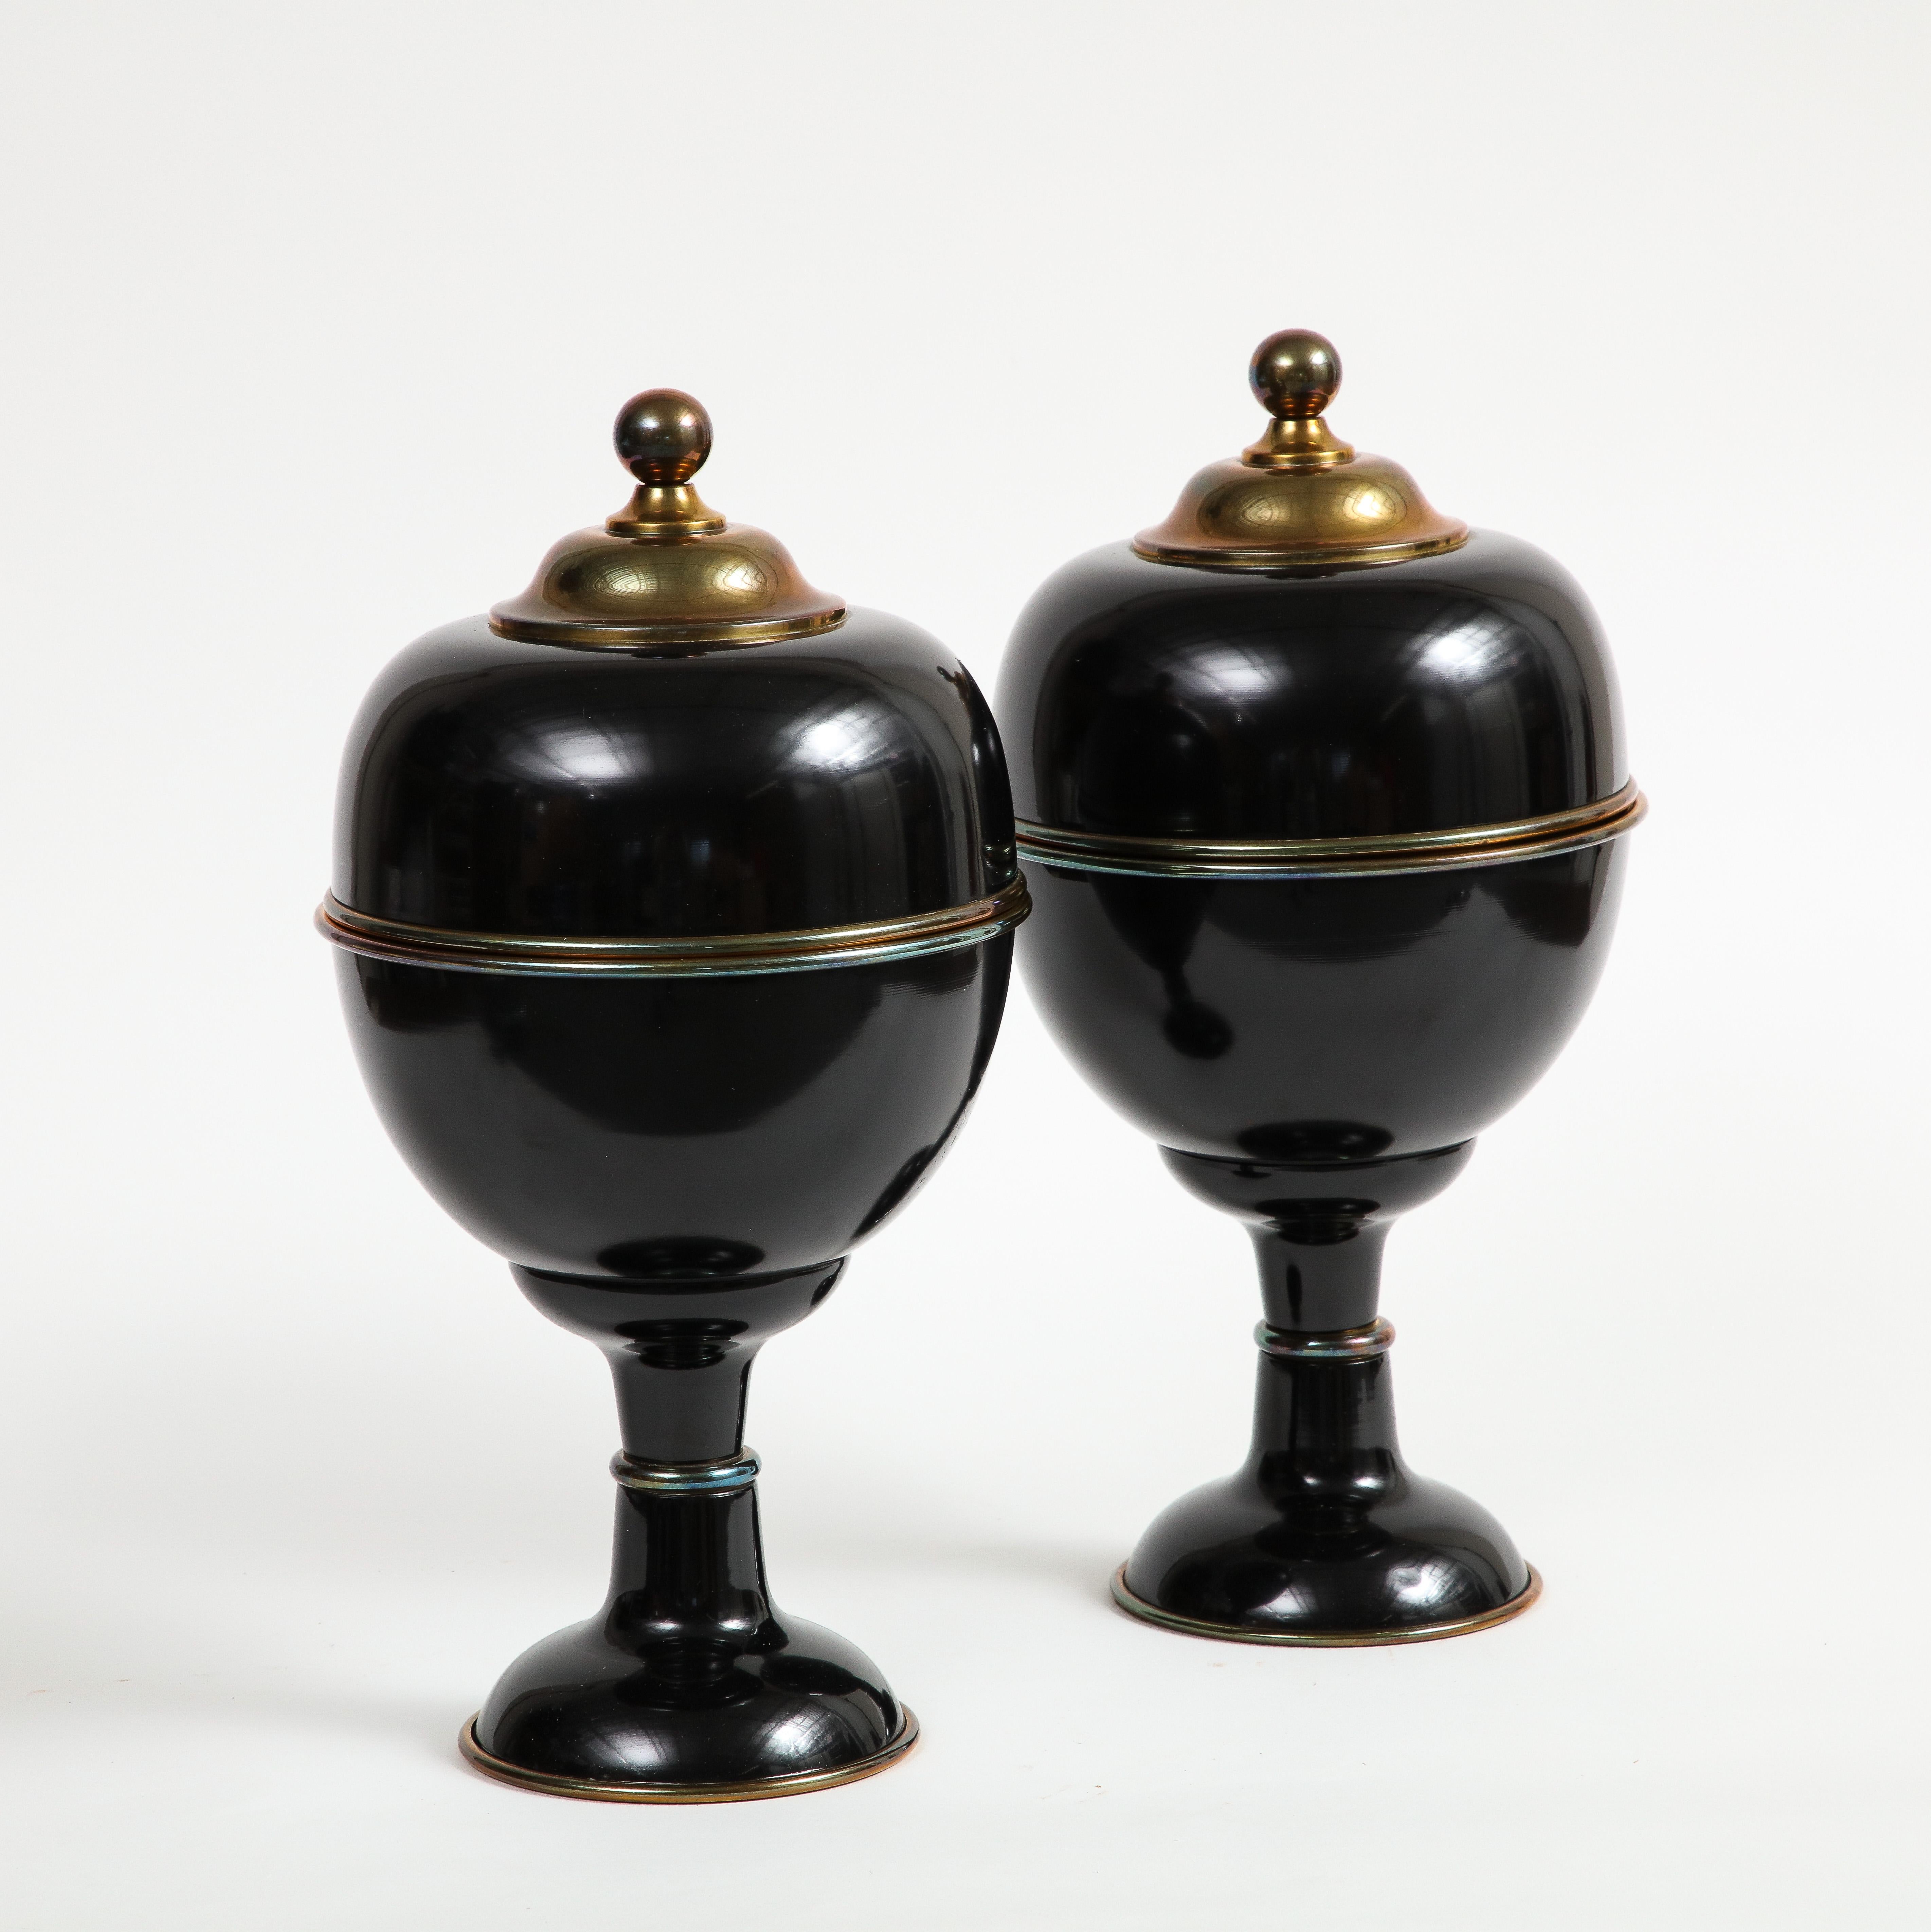 Pair of large decorative black enamel Guild Master urns with brass details. Interior is lined with brass. 

Additional Dimensions: 
bottom base 5.5